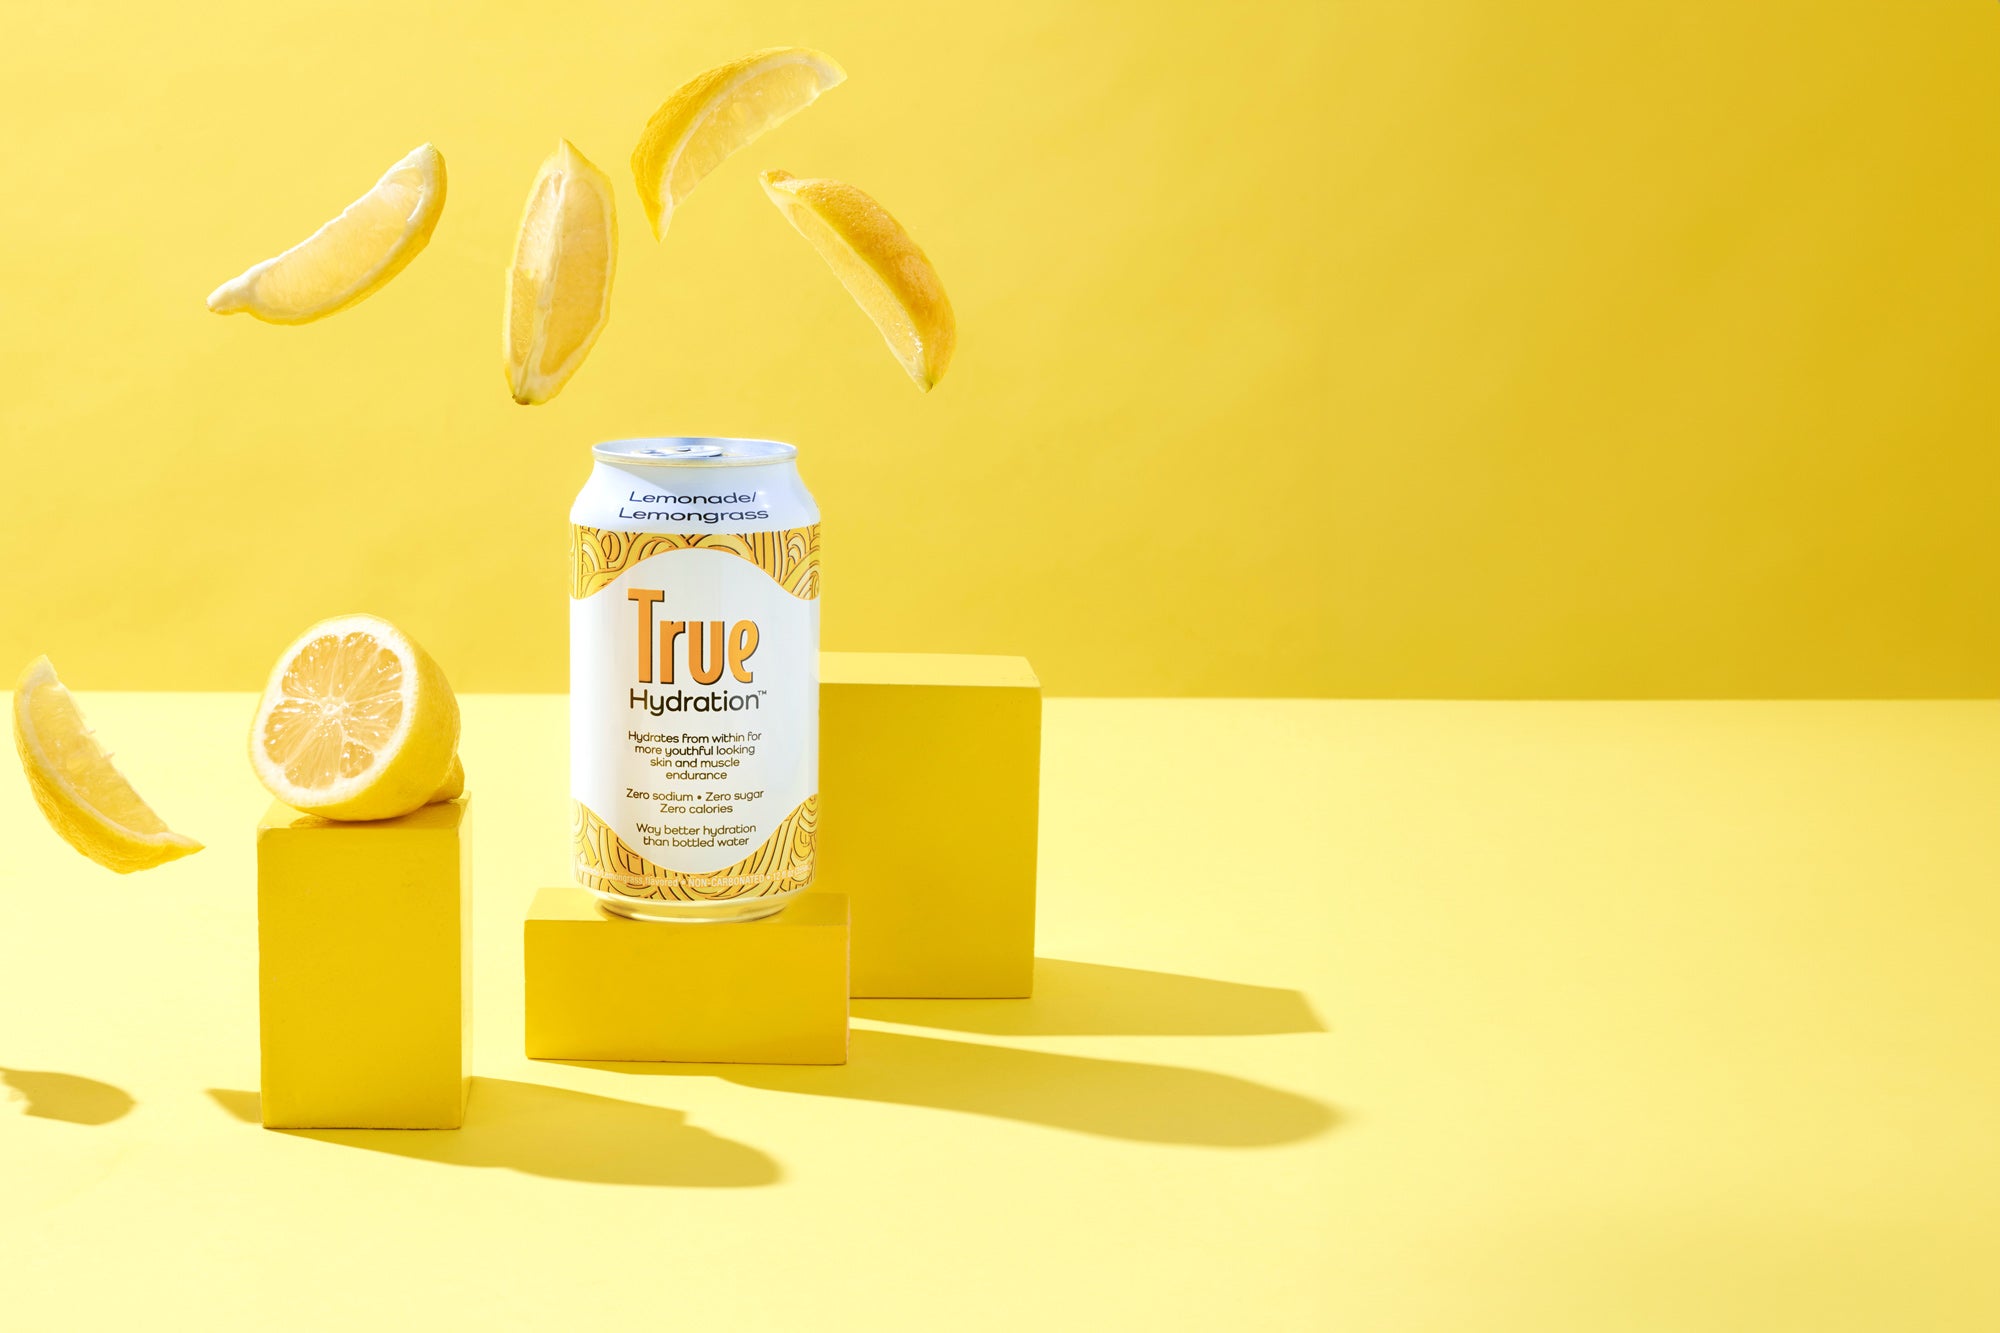 Can of Lemondade / Lemongrass flavor True Hydration on a yellow pedestal with lemon slices in the air on a yellow background